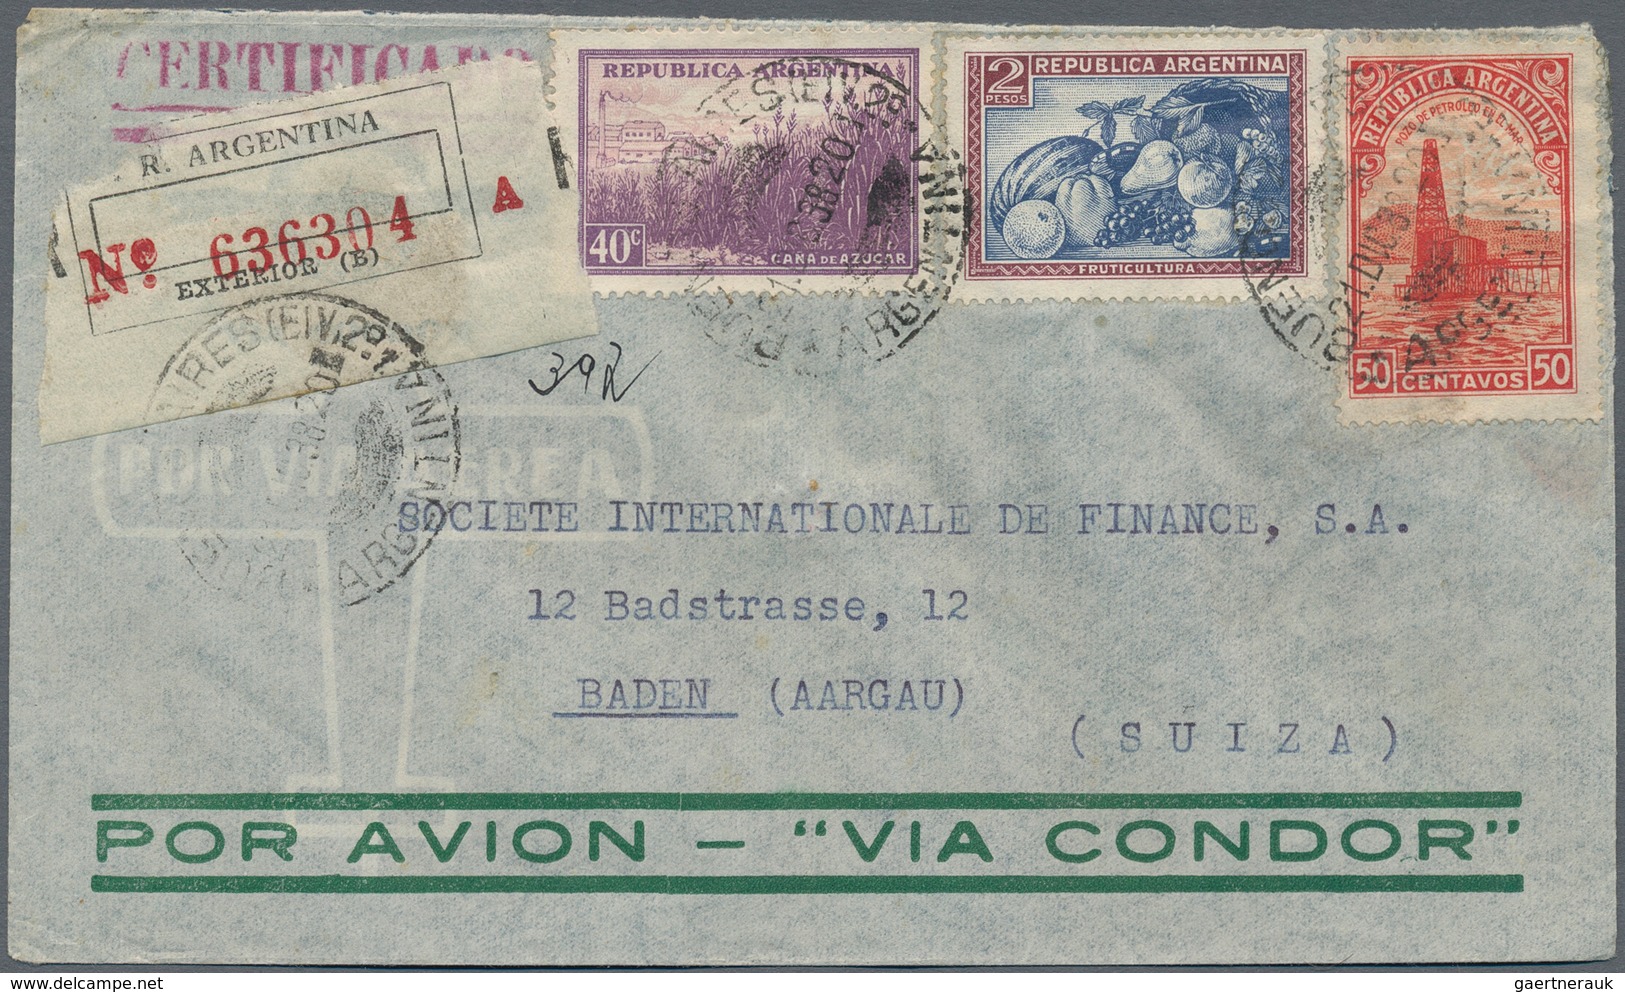 Argentinien: 1904/77 (ca.), apprx. 80 covers mostly airmails to Switzerland and some to other Europe